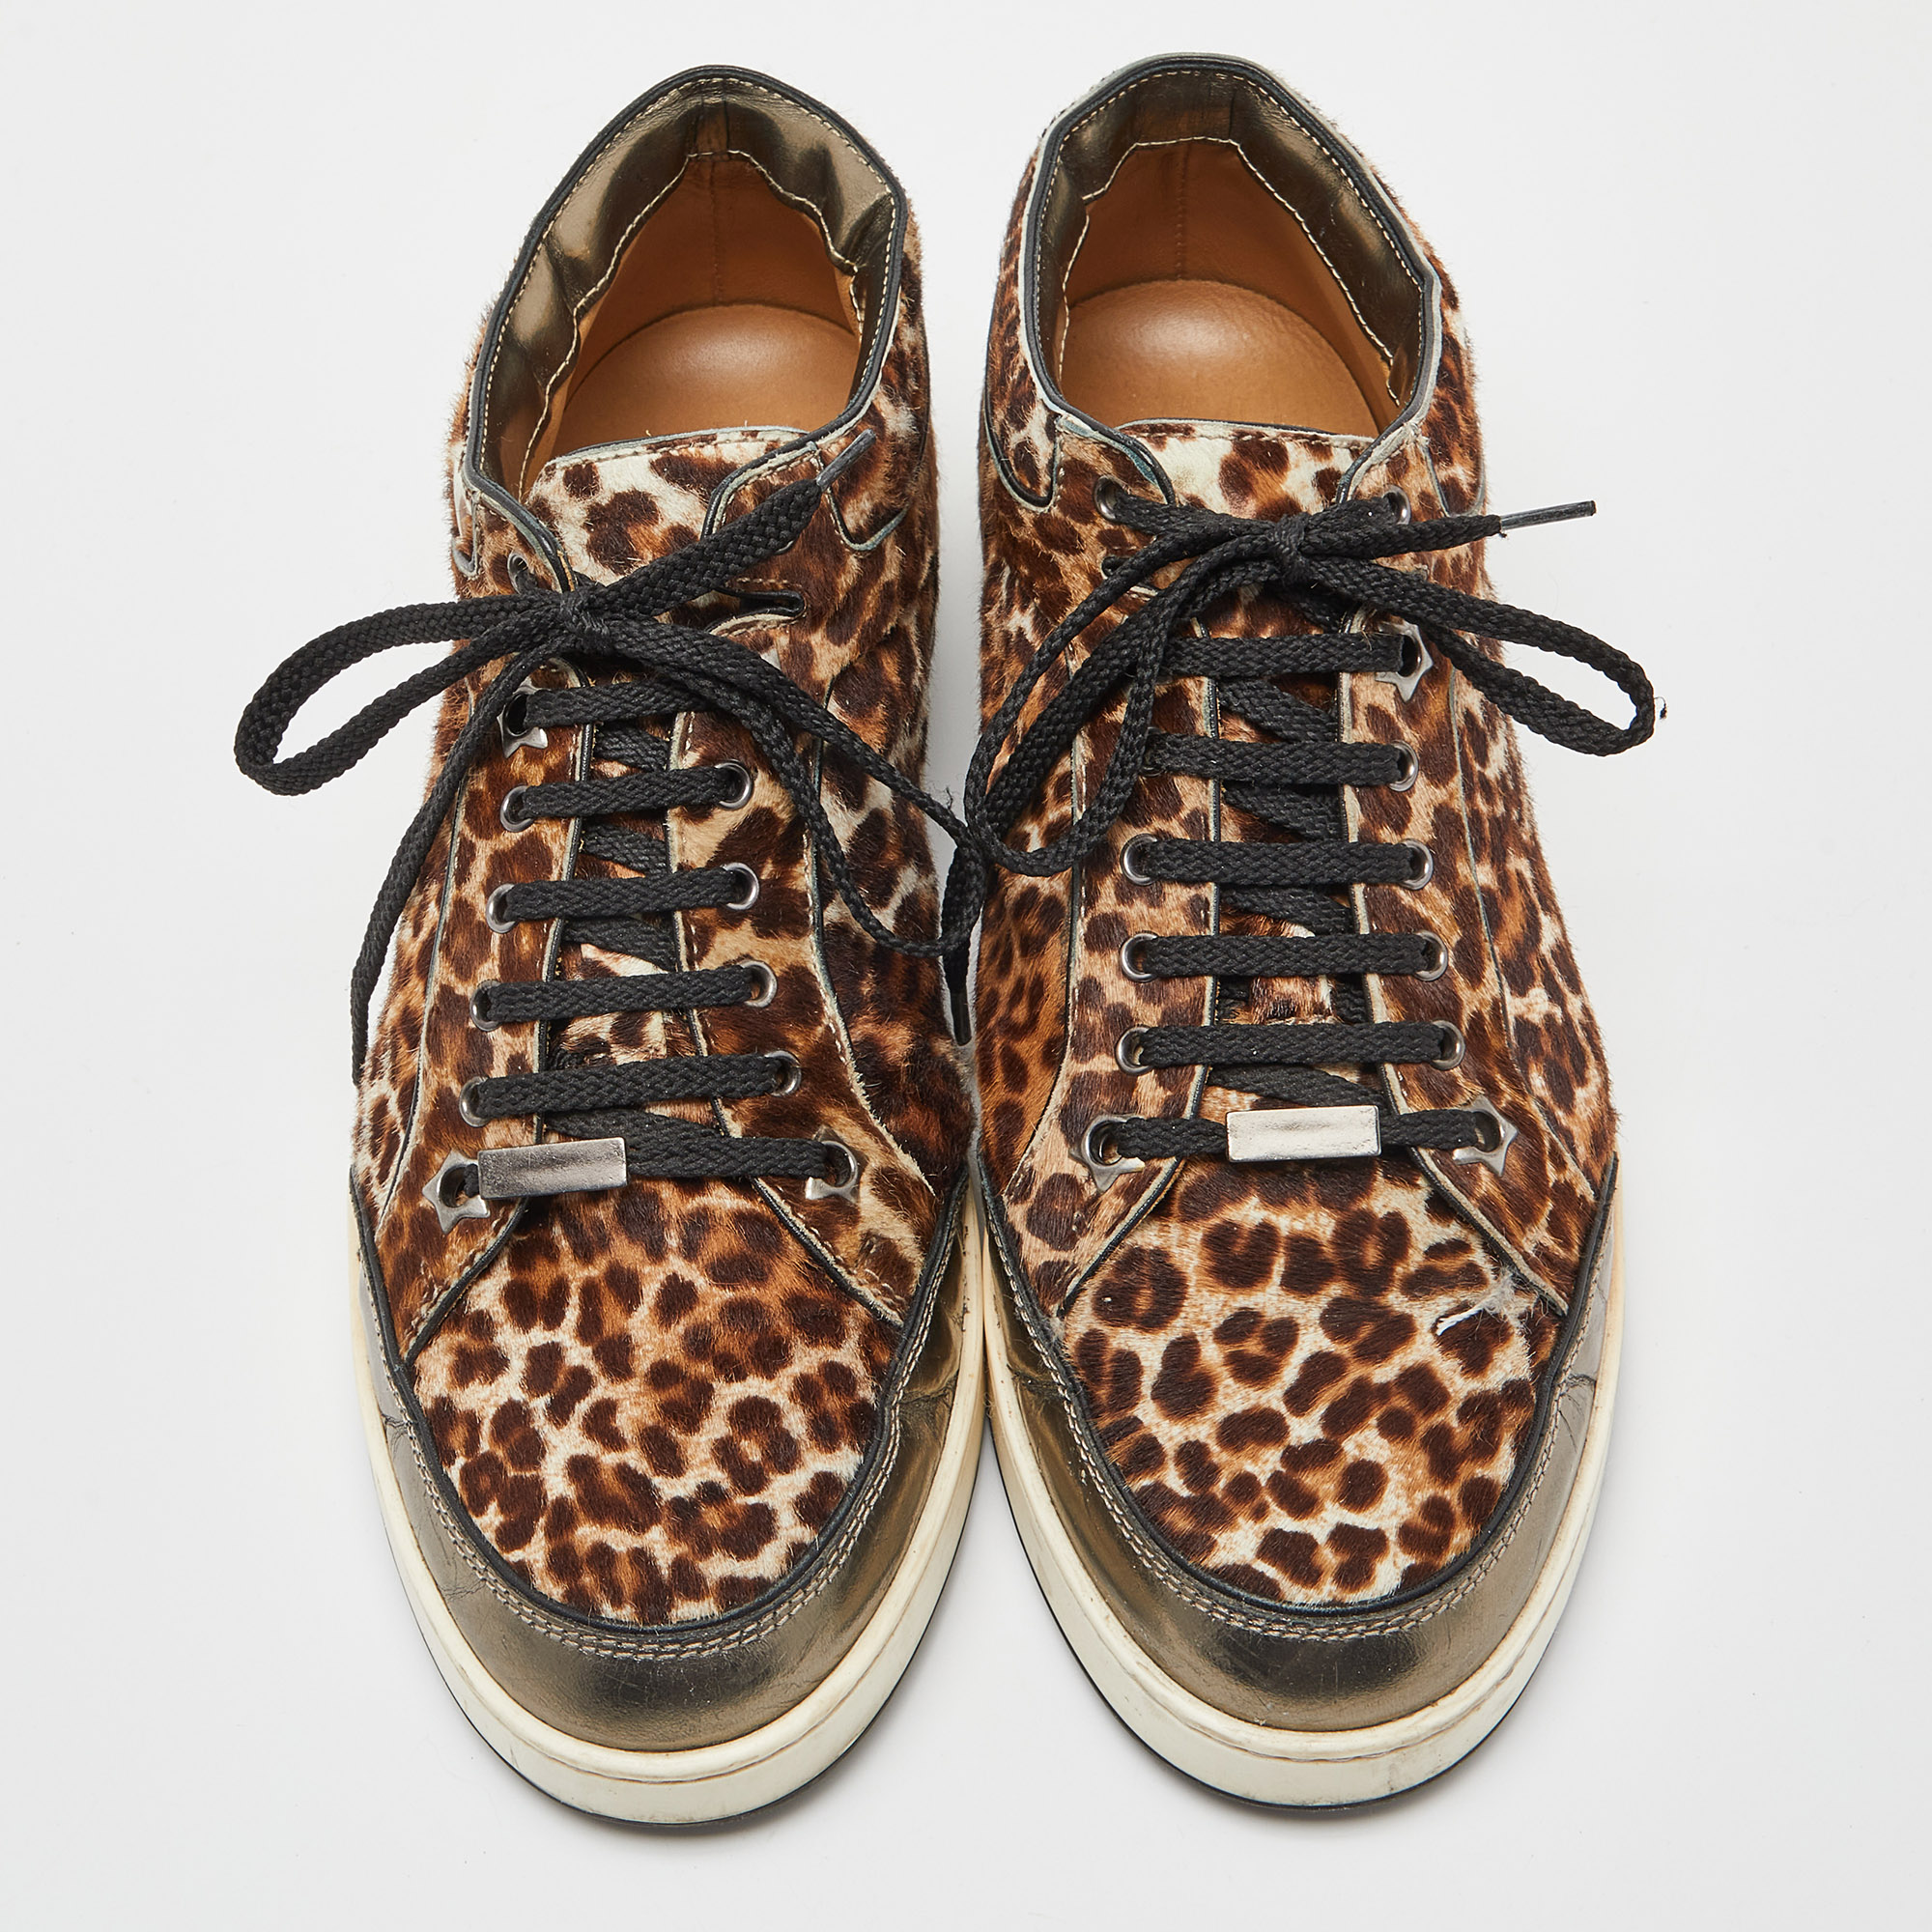 Jimmy Choo Brown/Metallic Leopard Print Calfhair And Mirrored Leather Miami Low Top Sneakers Size 38.5